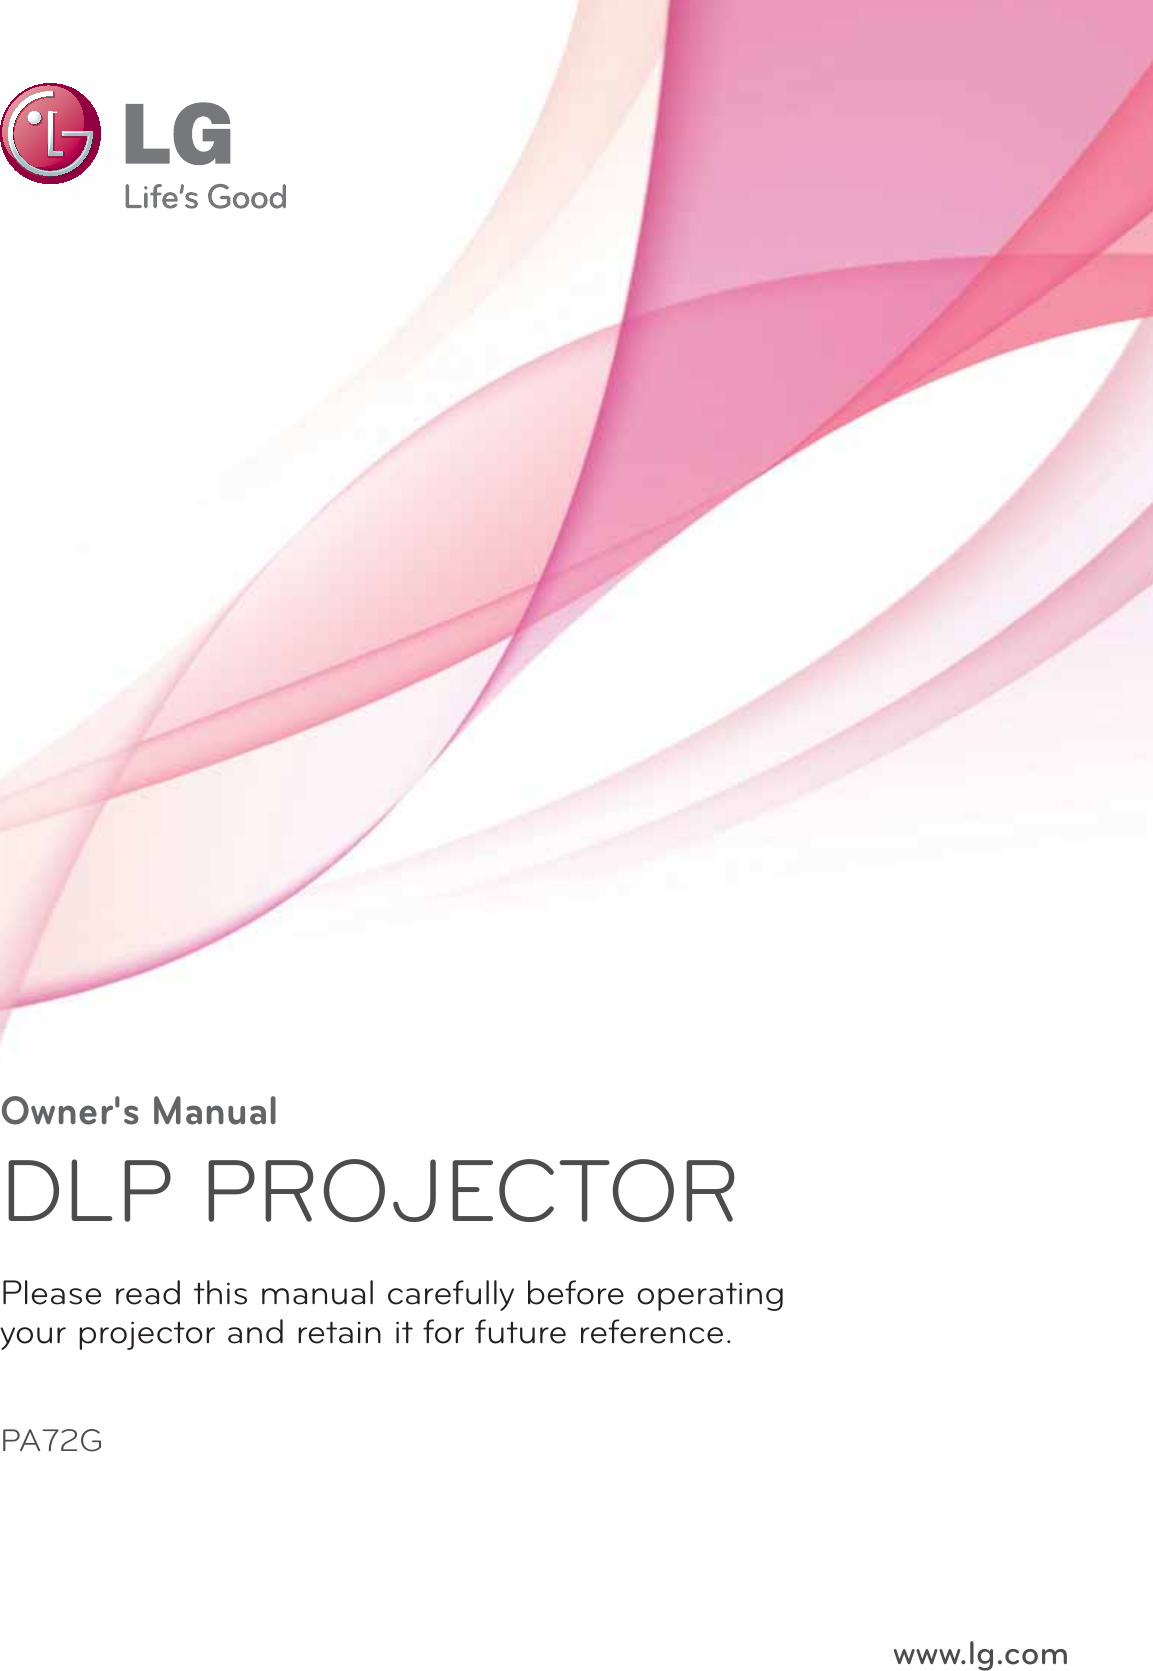 Owner&apos;s ManualDLP PROJECTORPA72GPlease read this manual carefully before operatingyour projector and retain it for future reference.www.lg.com